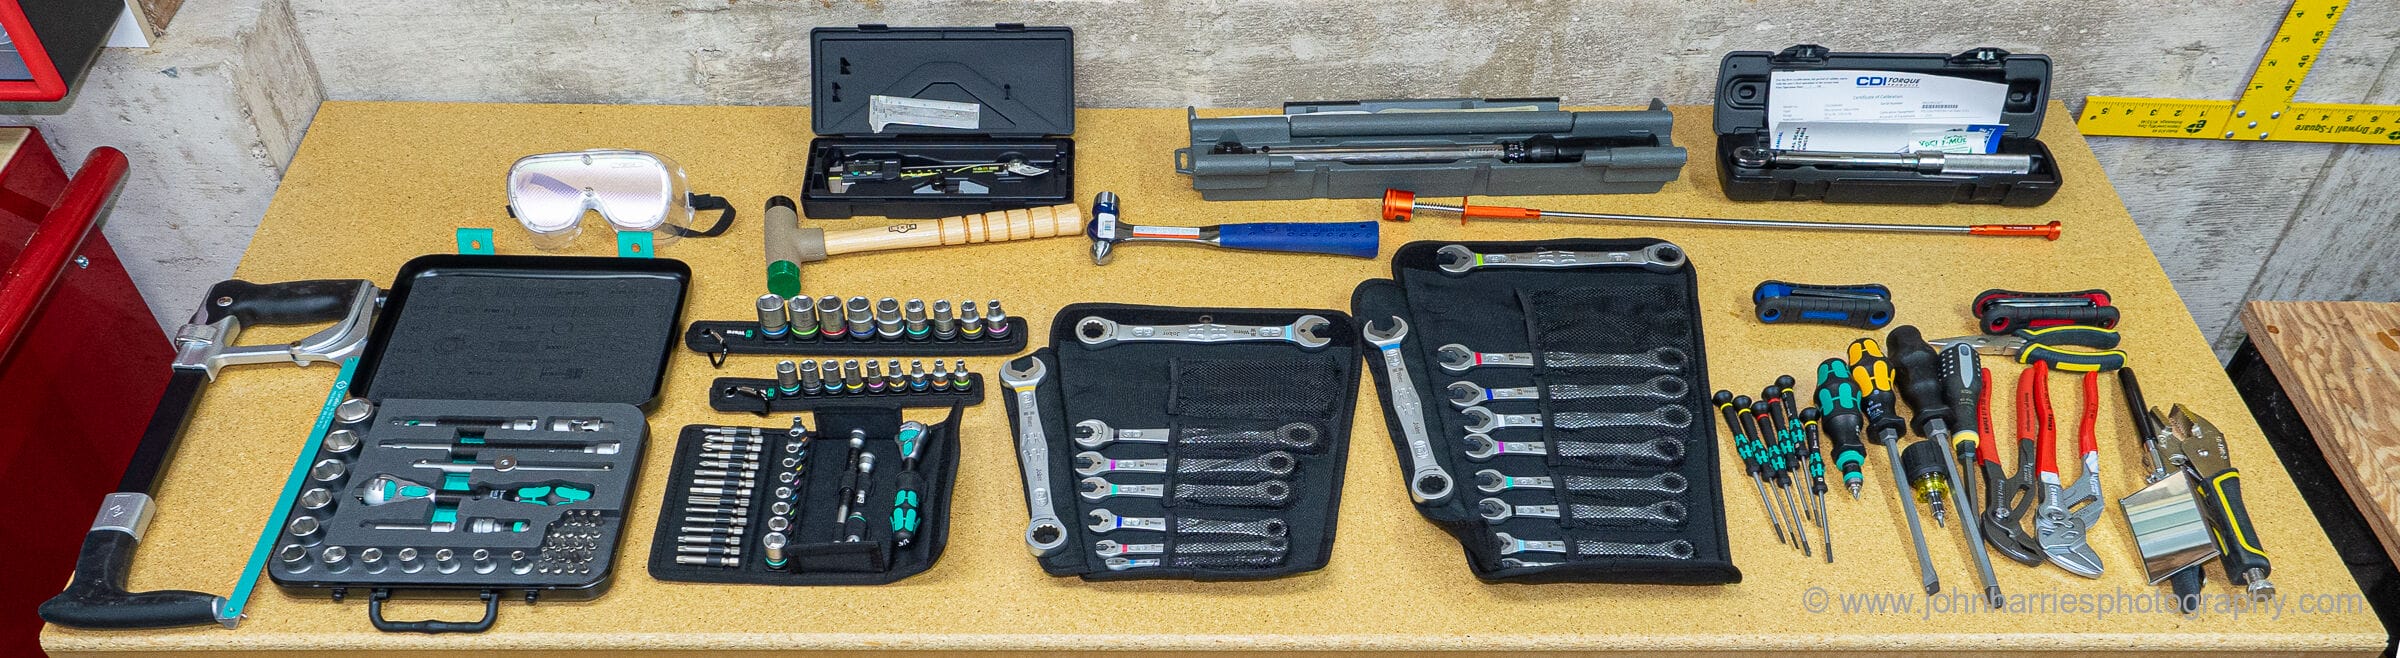 Is this a better tool kit? - Yachting Monthly